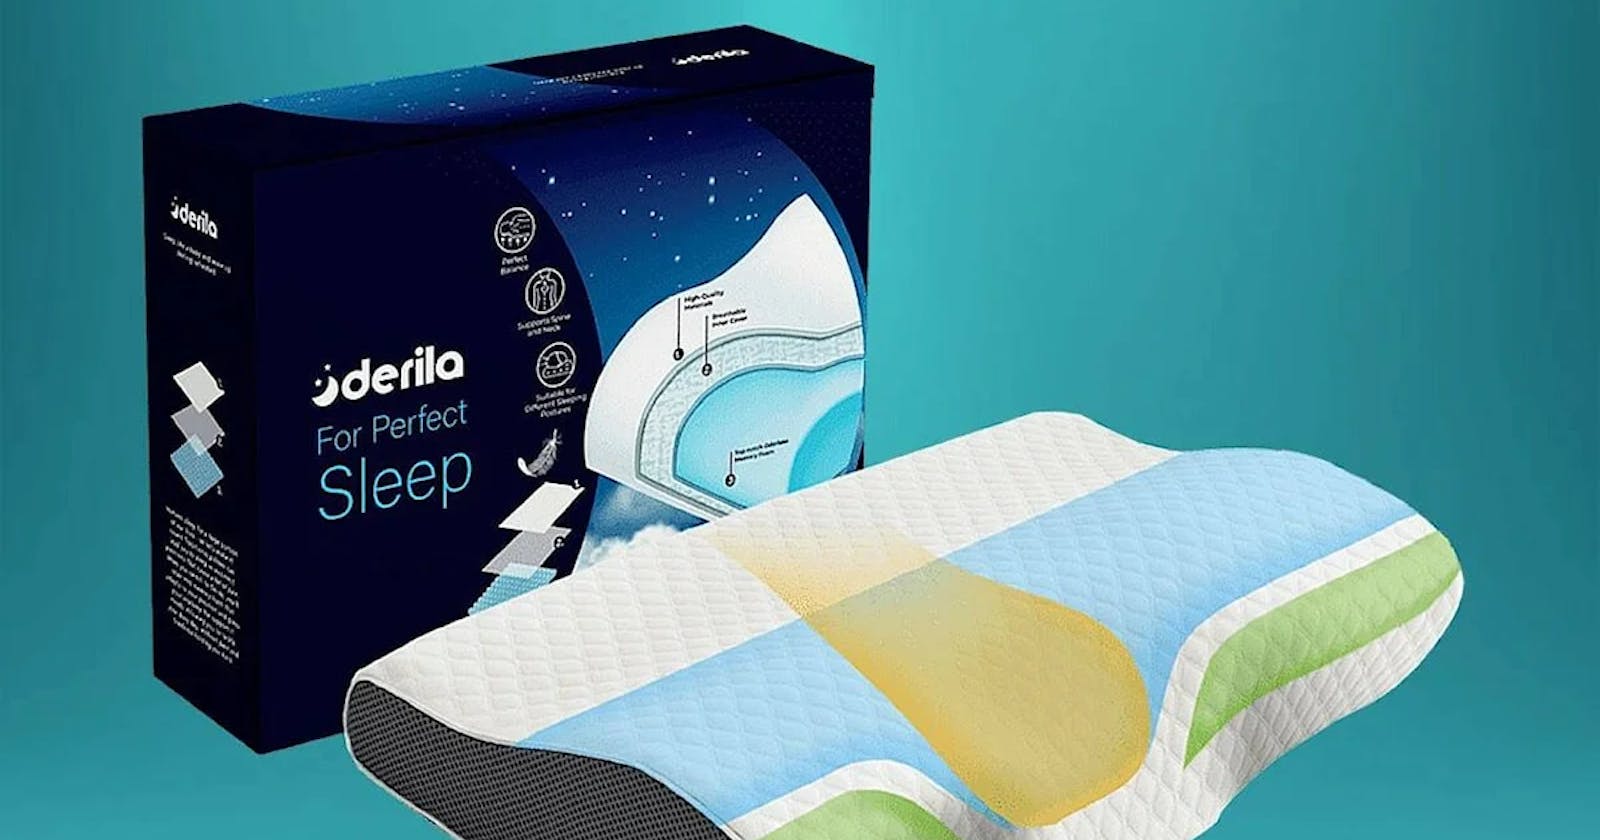 Derila Memory Foam Pillow Reviews [ READ ABOUT BENEFITS] An Honest Review Based On Personal Experience!